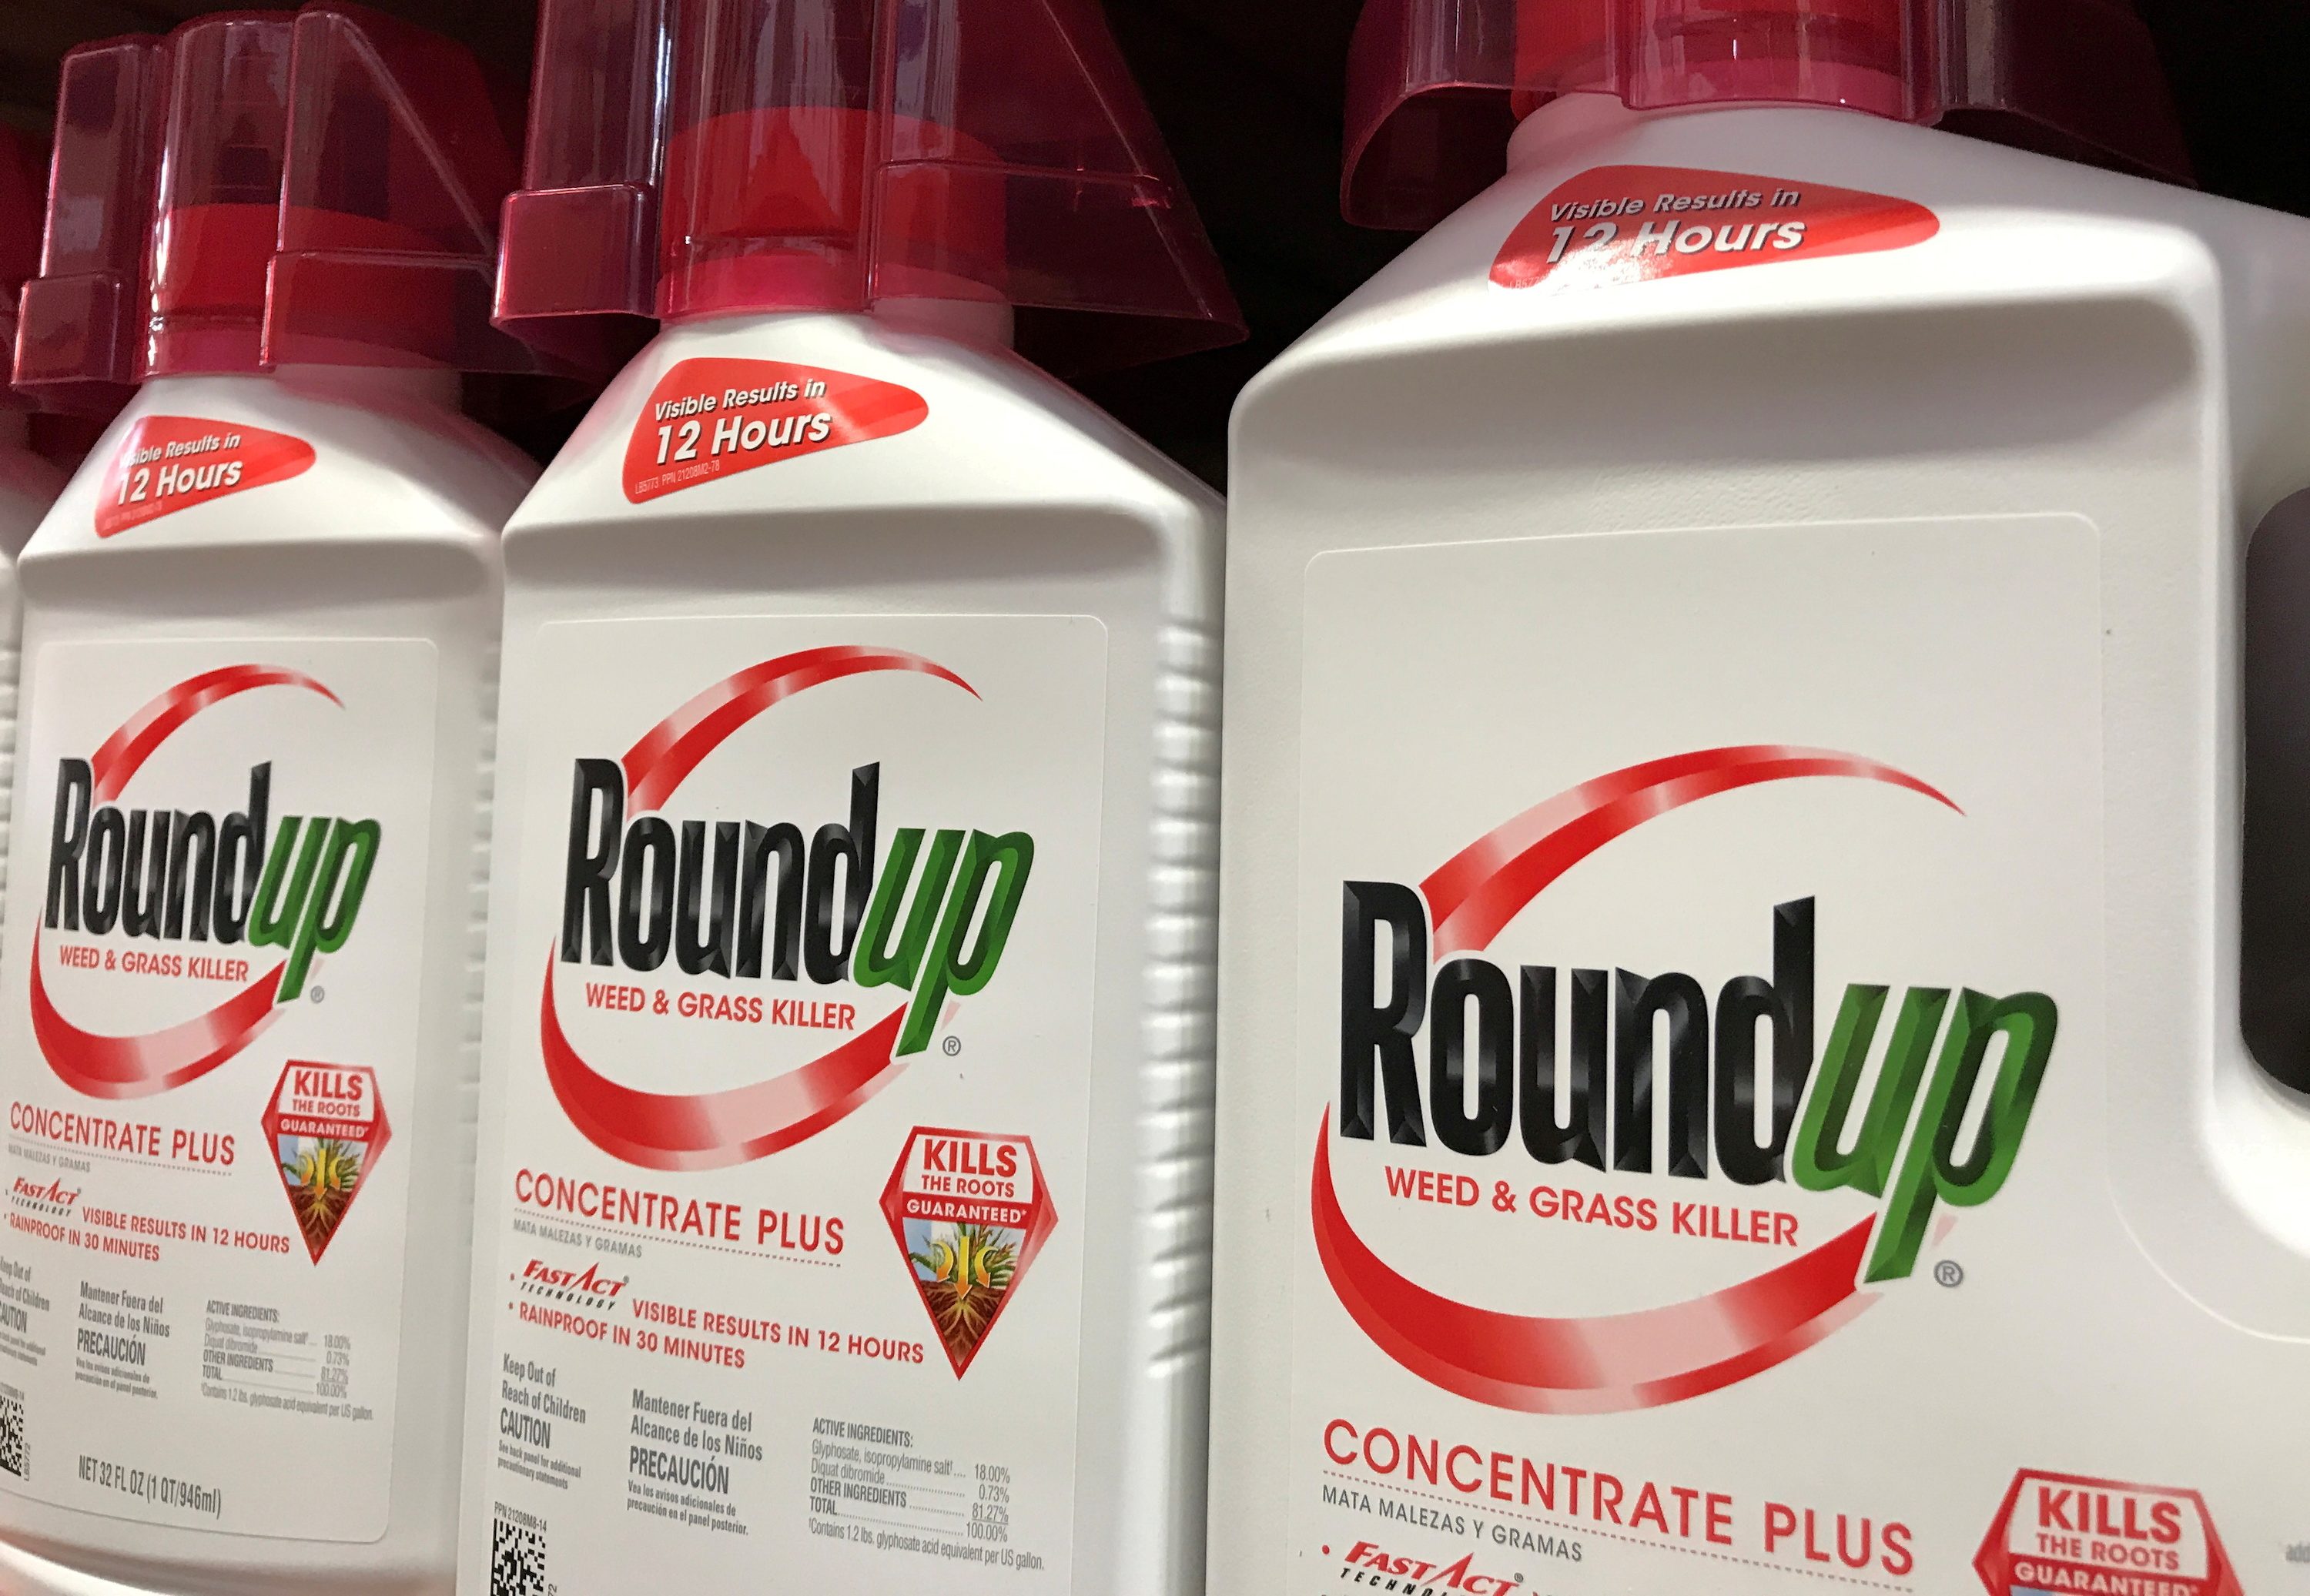 Supreme Court asks US government for views on Bayer weedkiller case